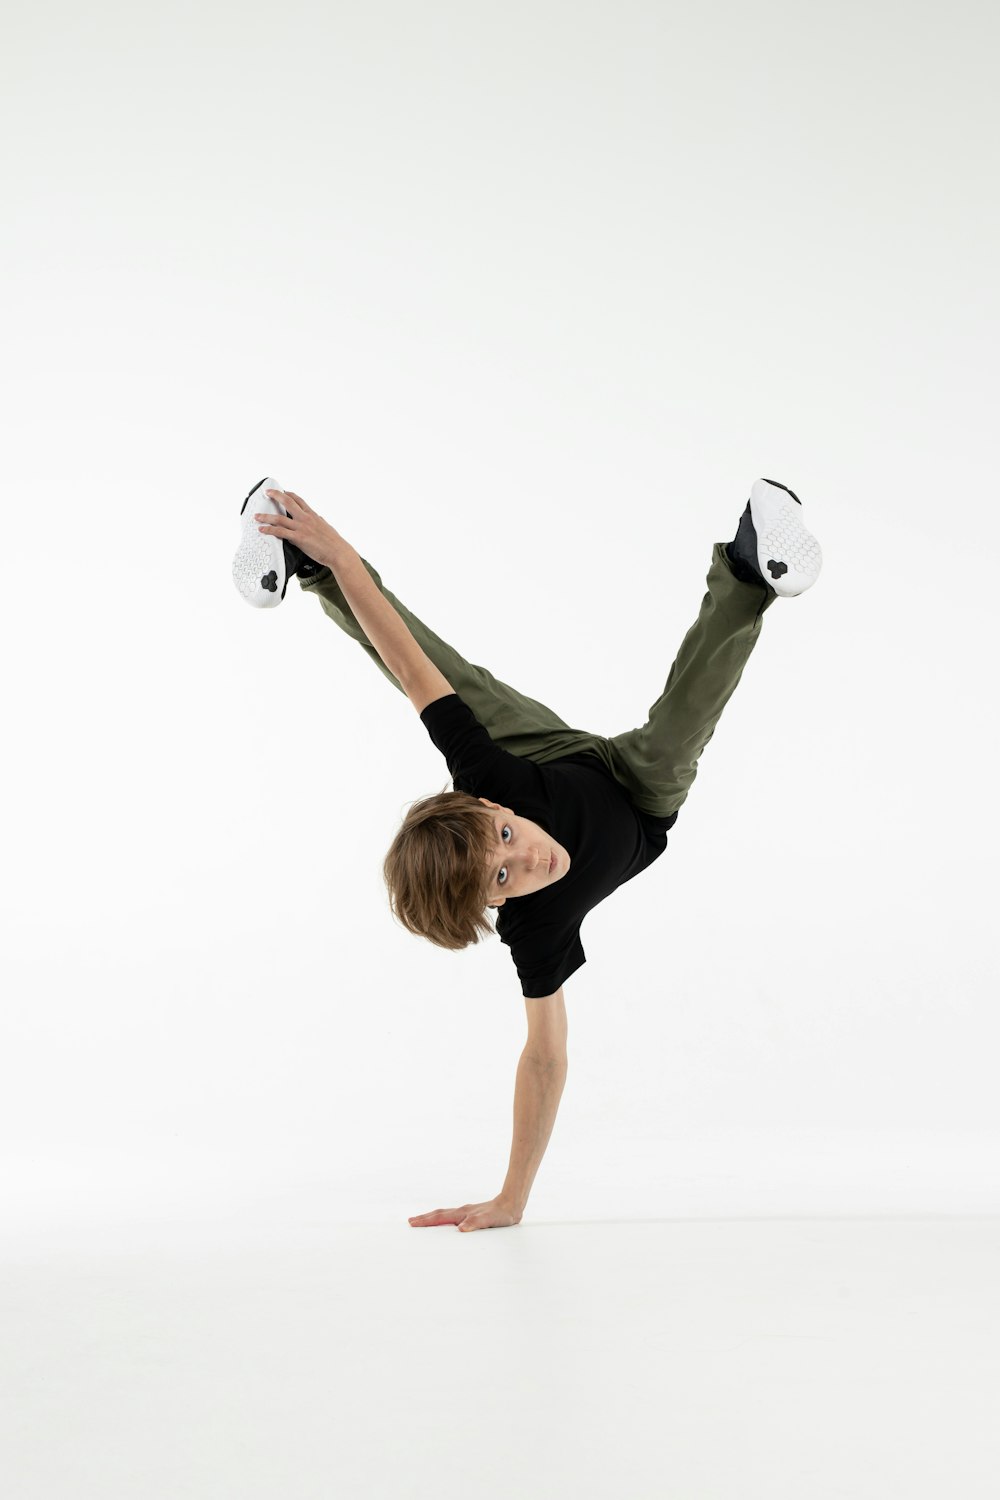 a young man doing a handstand on one leg